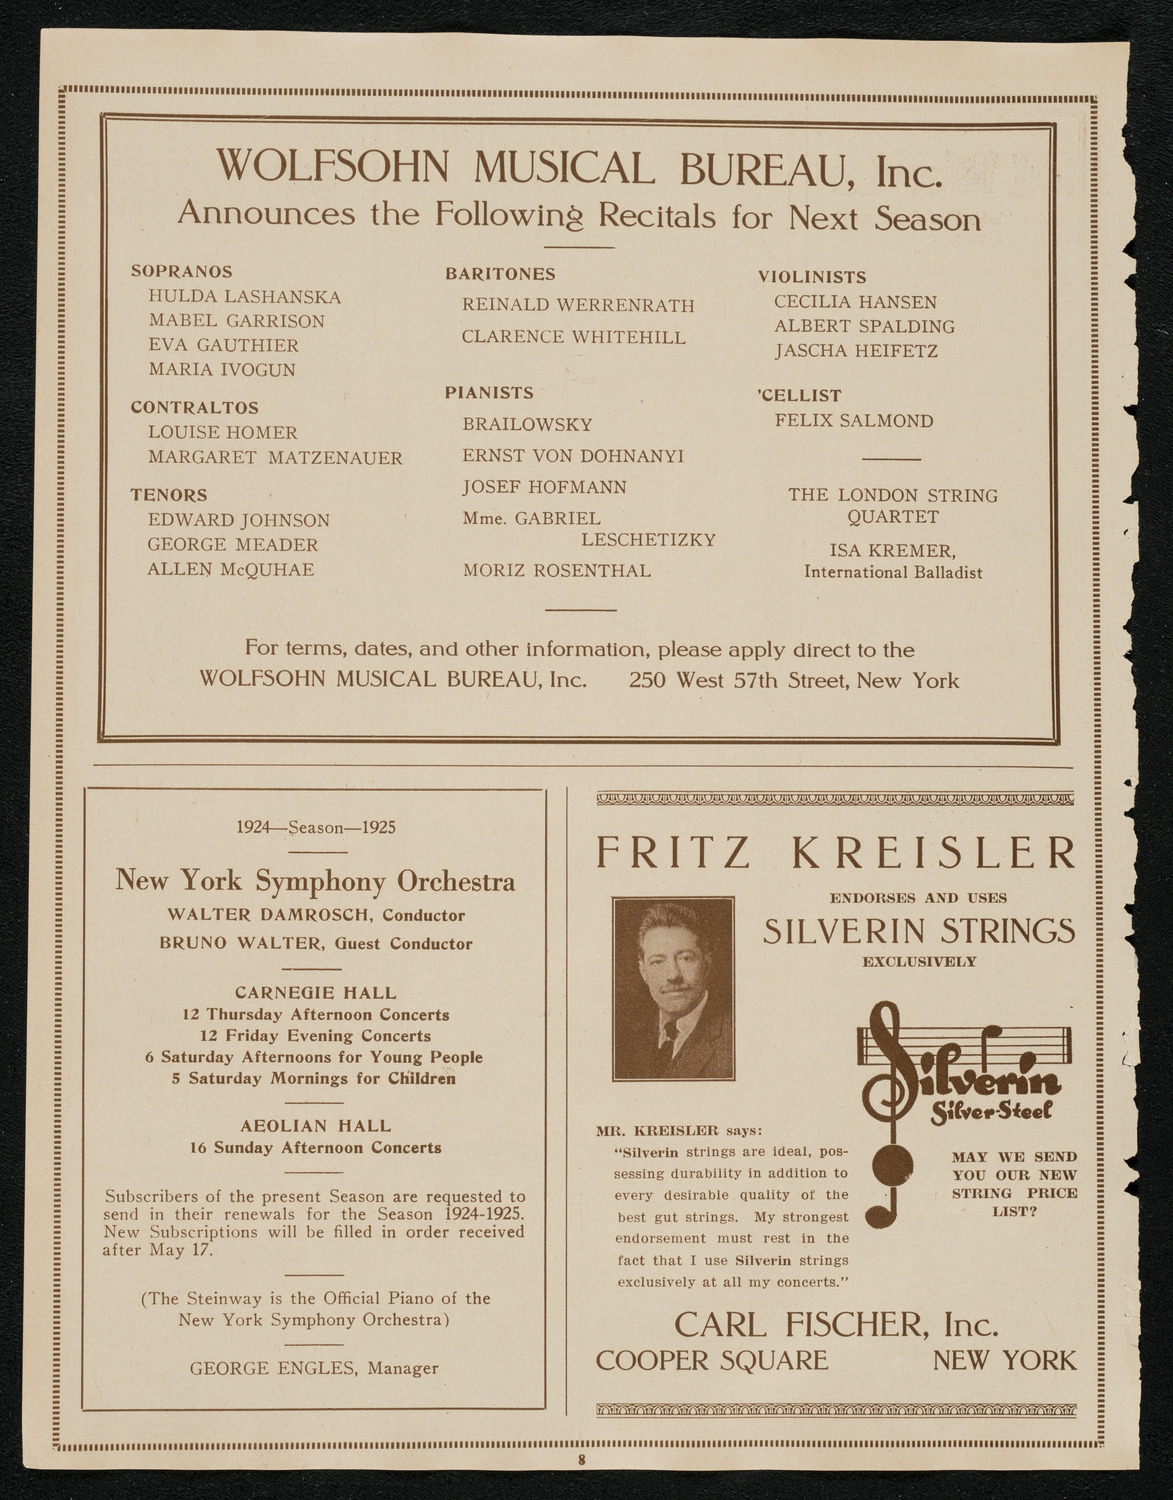 Graduation: College of Pharmacy of the City of New York Columbia University, May 22, 1924, program page 8